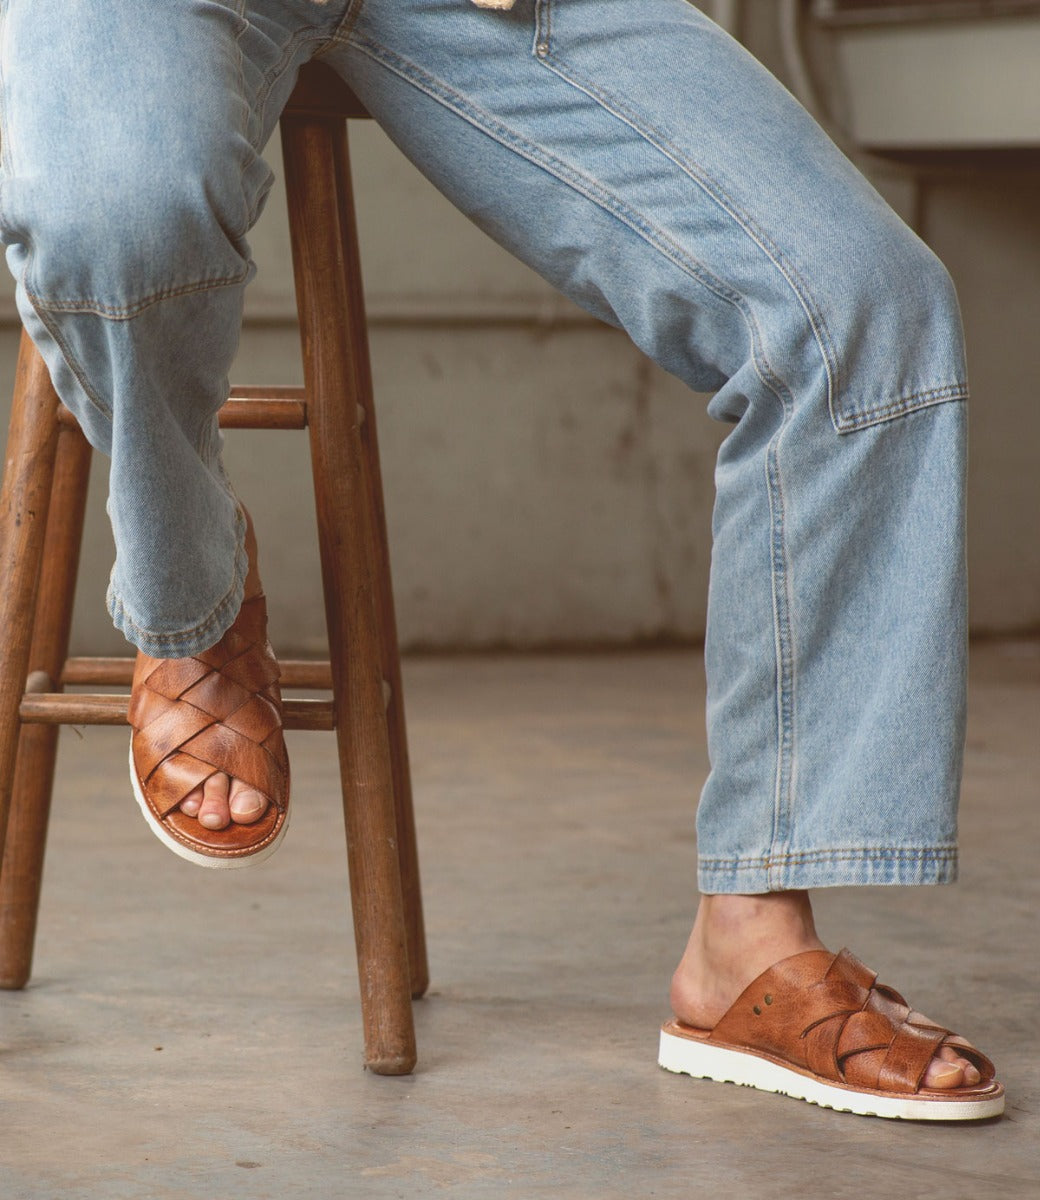 A person wearing Bed Stu Abraham Light Black Lux Sandals with a woven upper and blue jeans seated on a wooden stool, with one foot resting on the stool's lower rung.